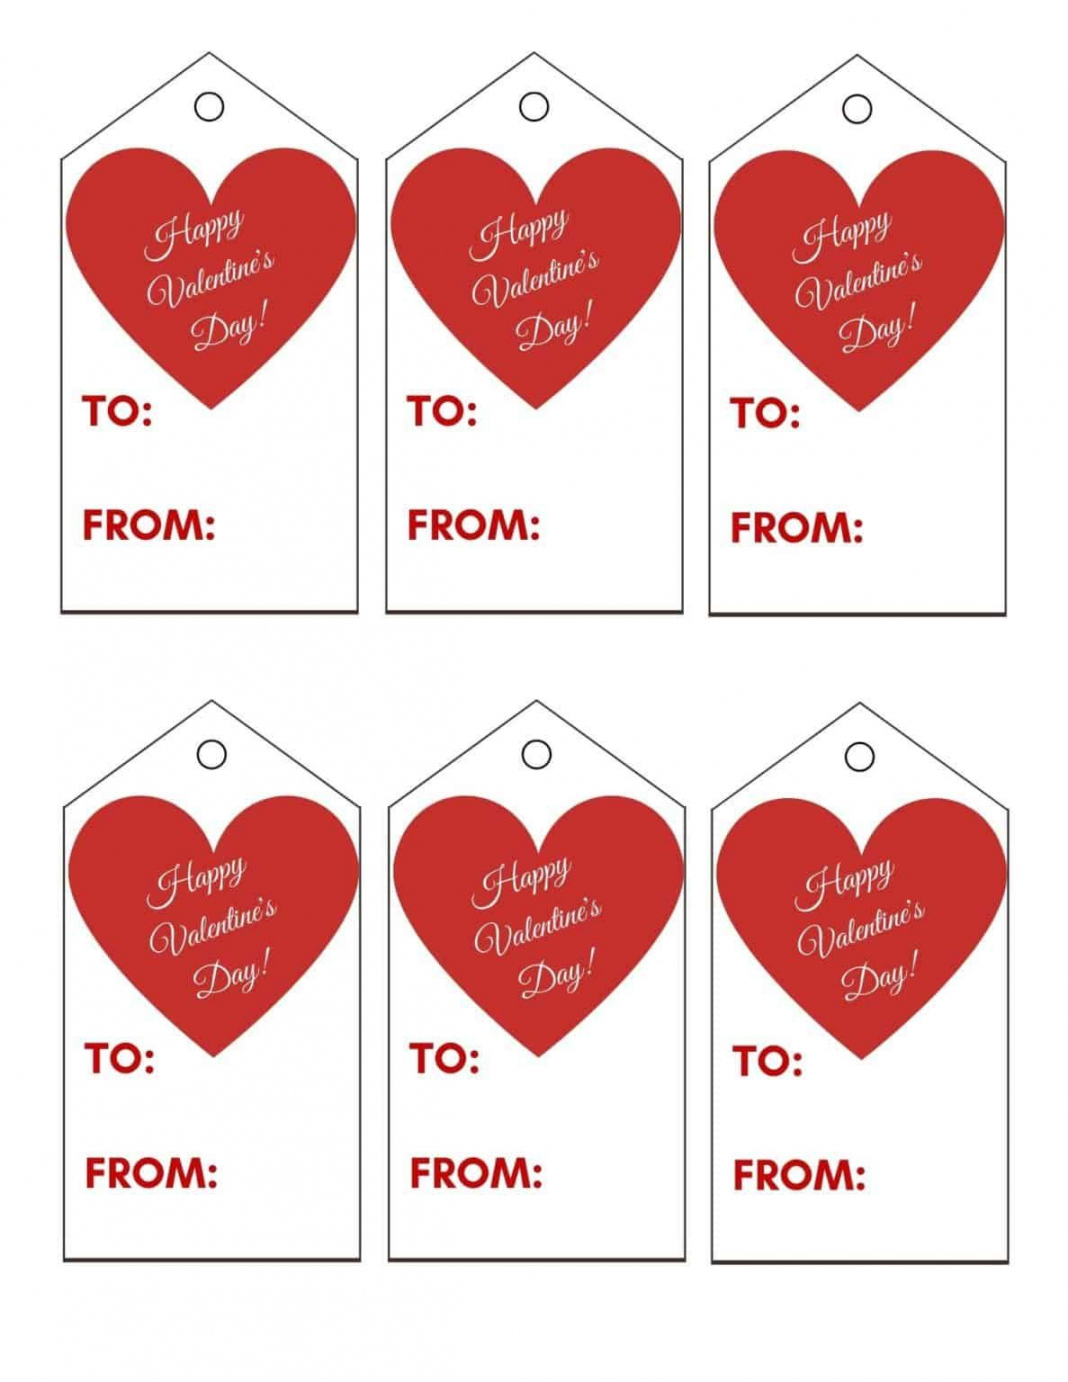 Pin on Paper Crafting - FREE Printables - Valentines Day Tags Printable Free